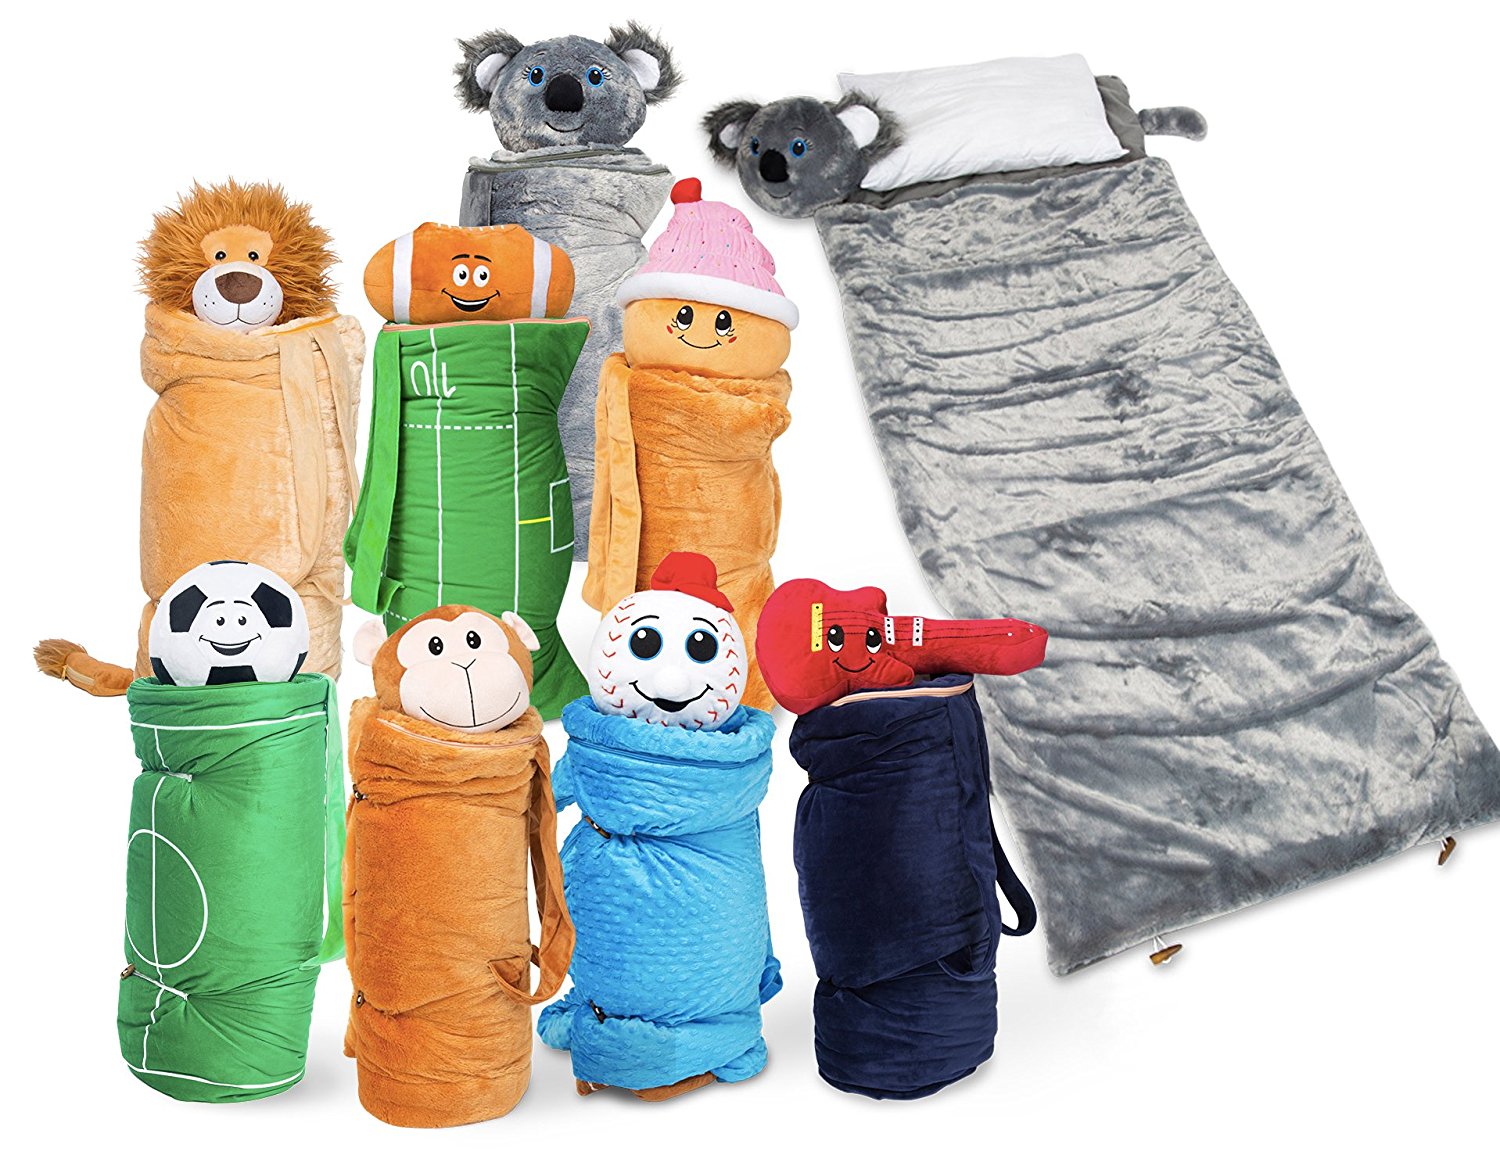 Best Toddler Sleeping Bags - For Camping, Daycare, Slumber Parties and Sleepovers! #travelgear #familytravel #campinggear #summergear #coldweathercamping #warmweathercamping #campingwithkids 